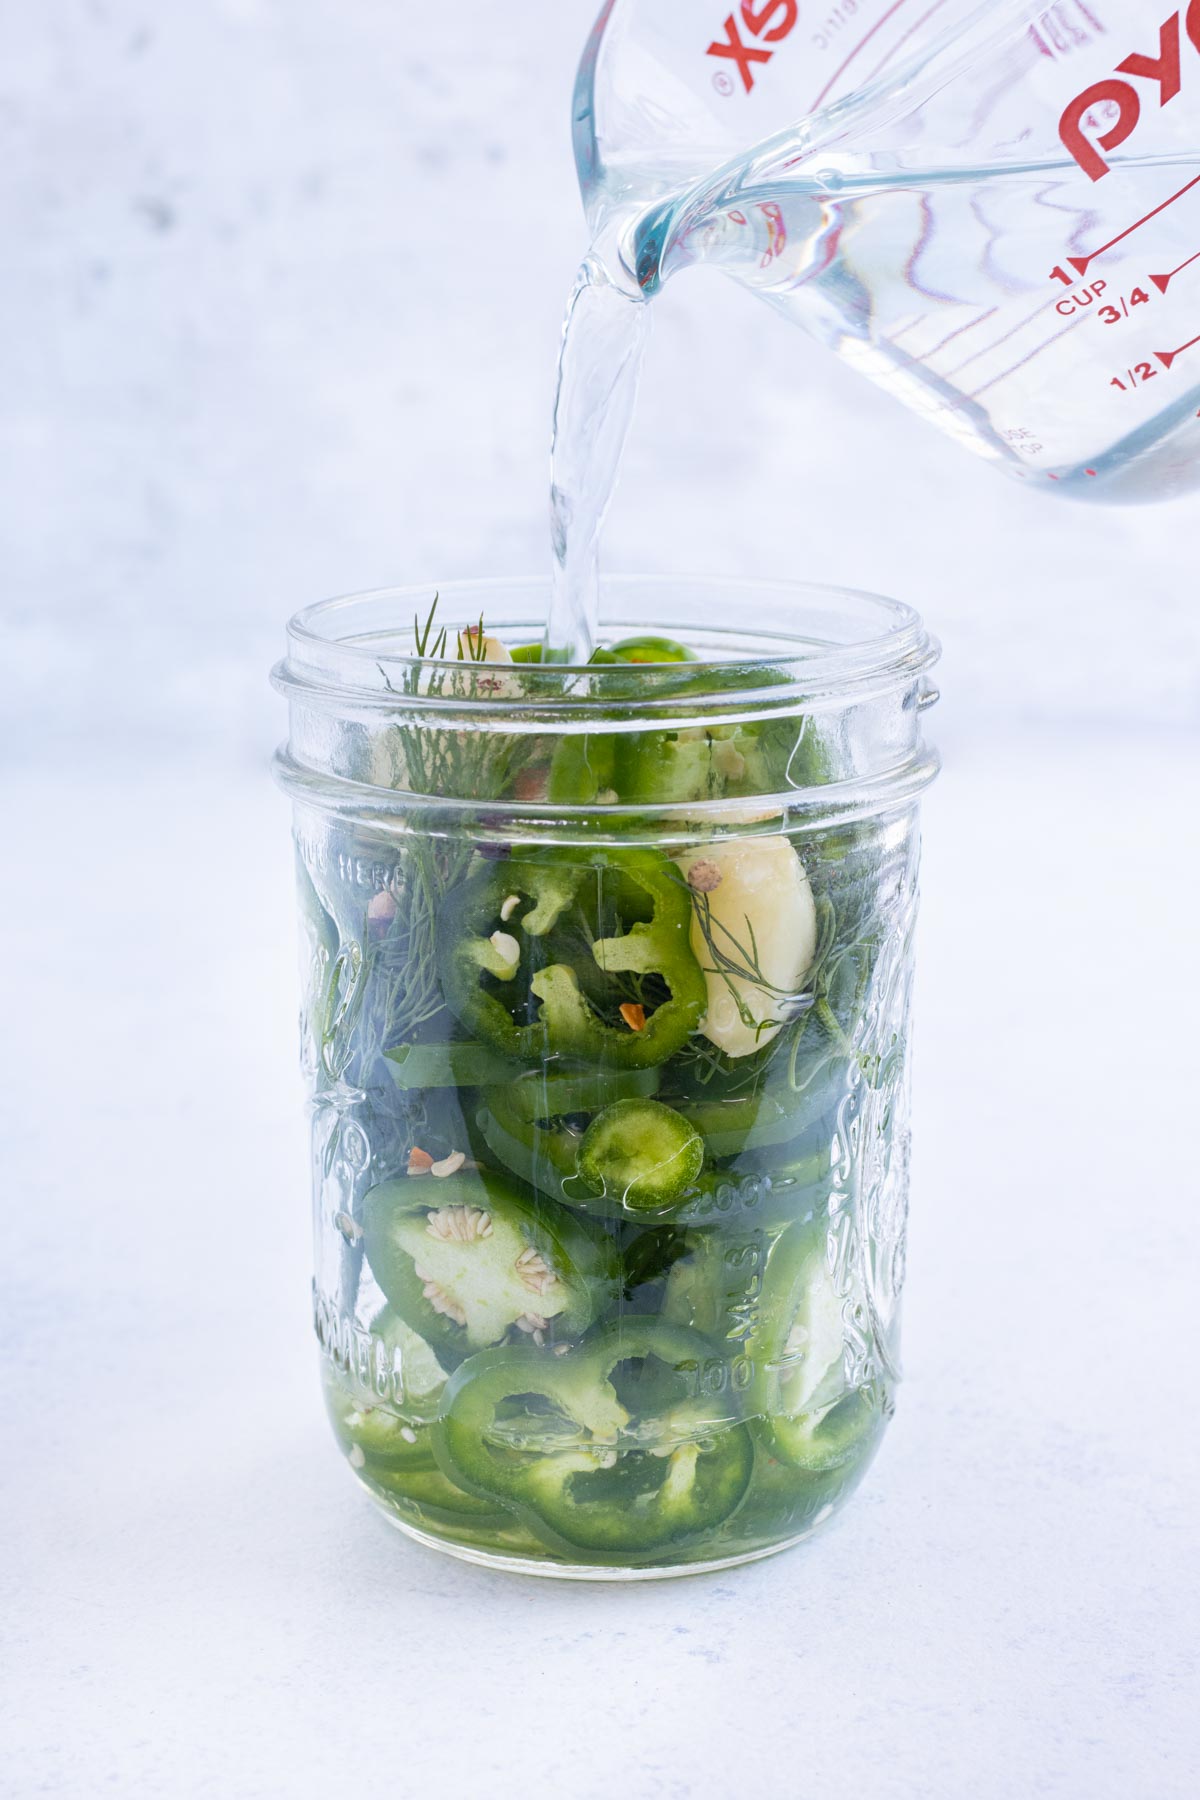 The brining solution is poured over vegetables in a jar.